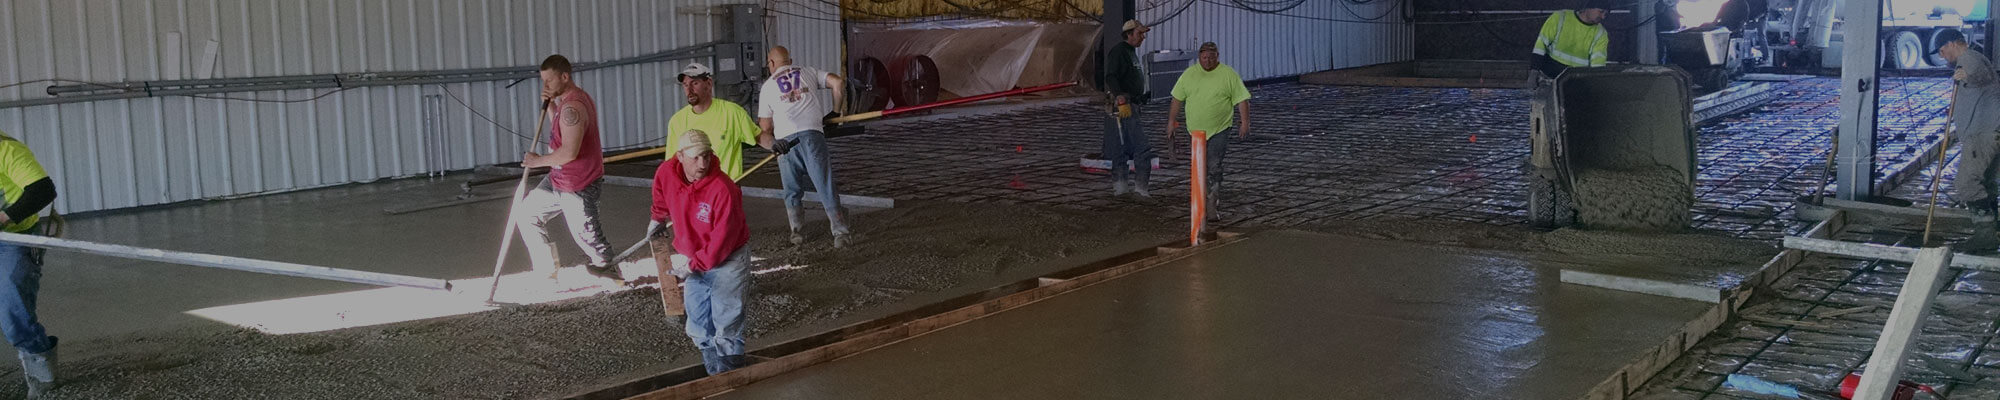 Large crew from Van Haren Construction working to pour, flatten, and smooth the concrete floor for a large commercial job